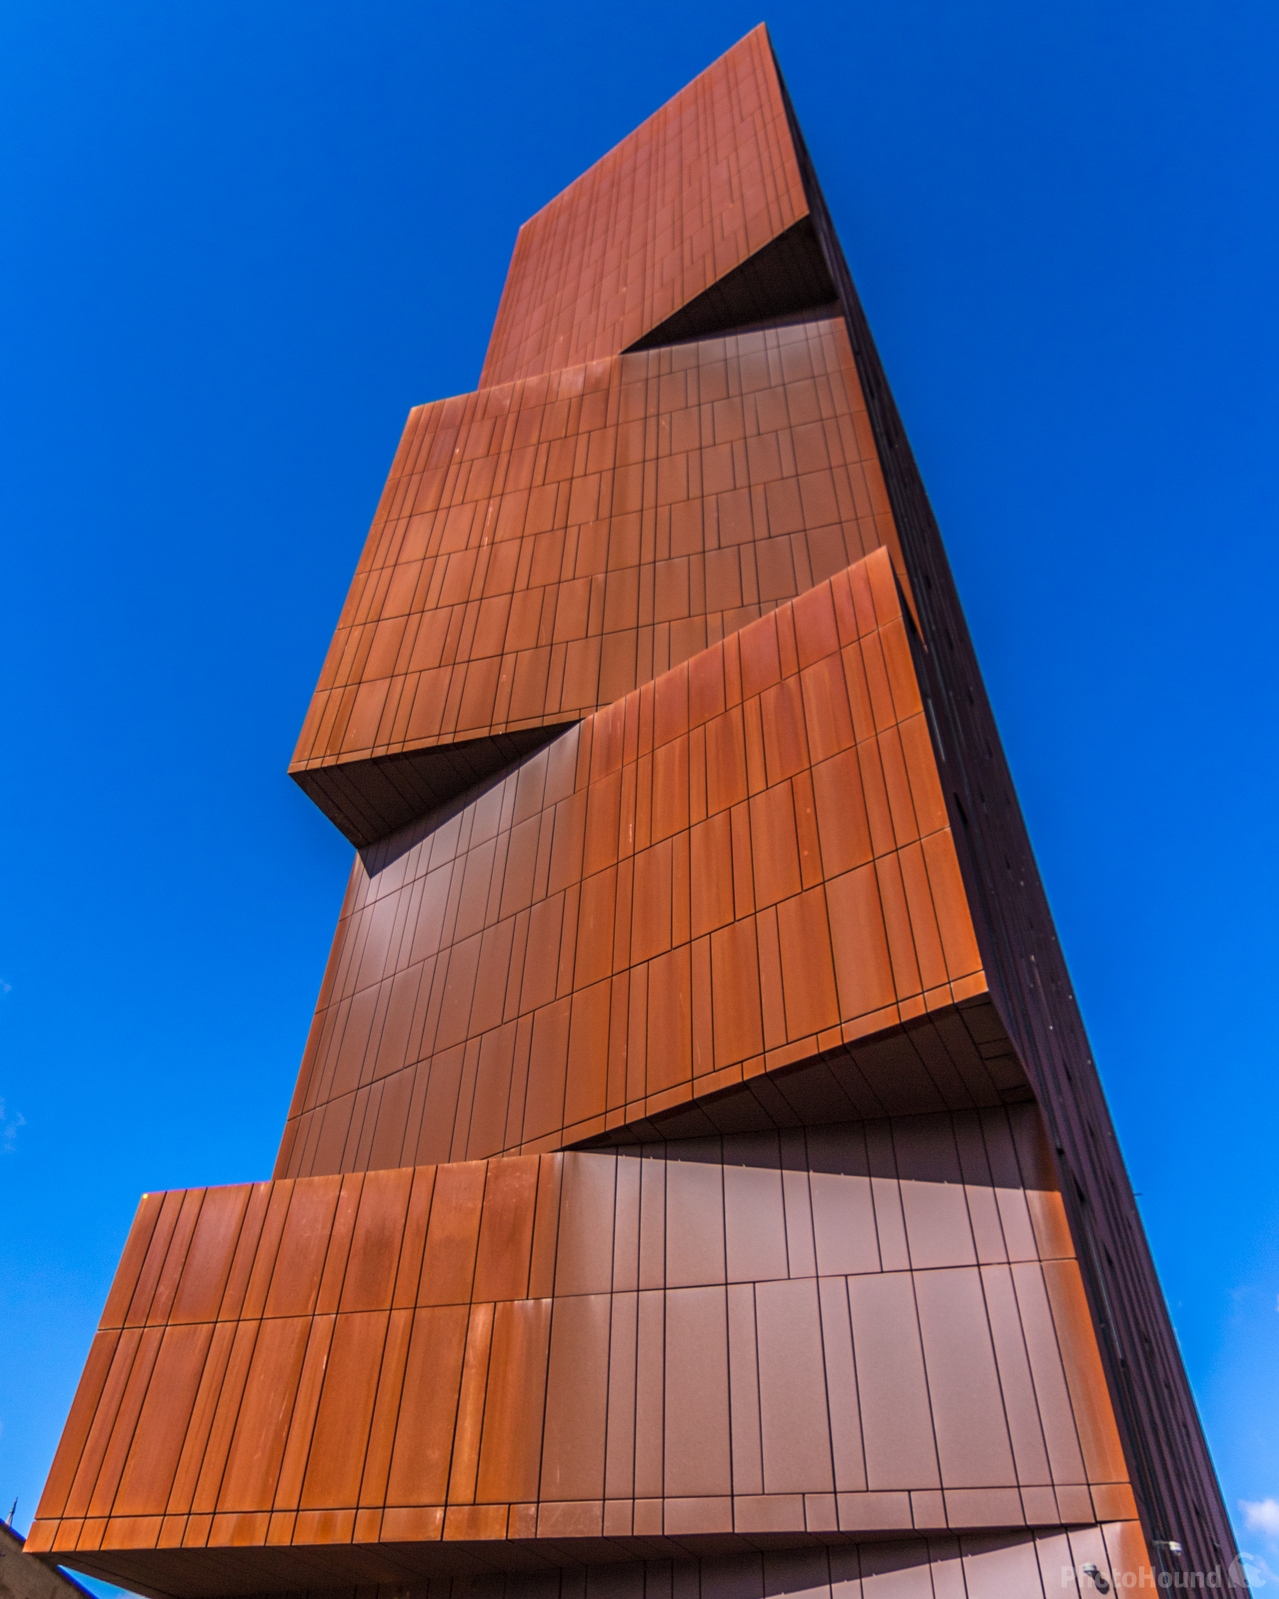 Image of Broadcasting Place (The Rusty Nail) by Andy Killingbeck